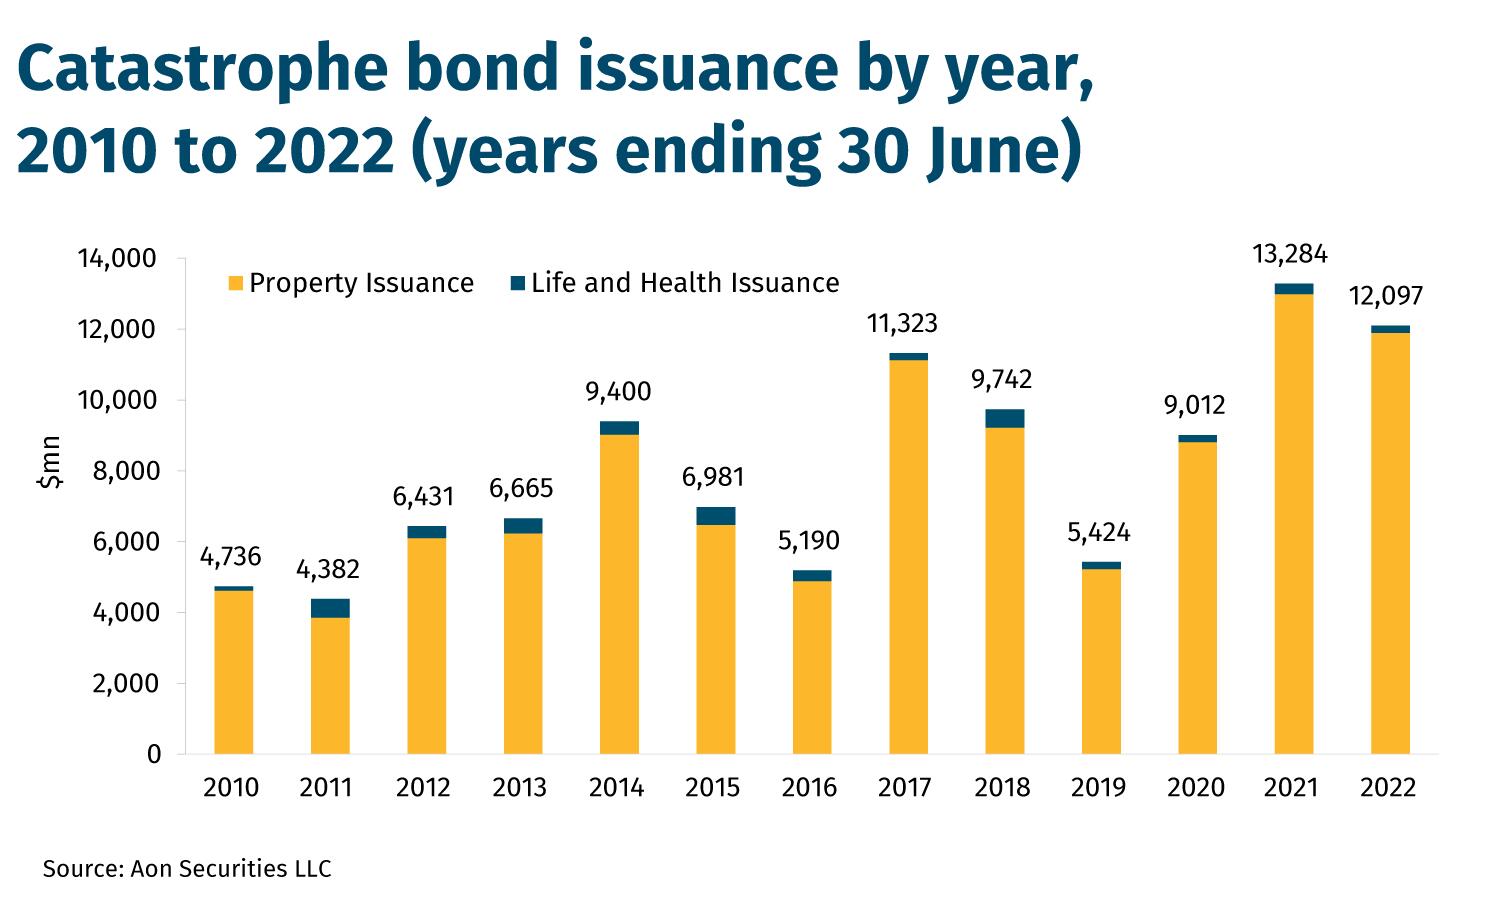 Catastrophe bond issuance by year, 2010 to 2022 (years ending 30 June)